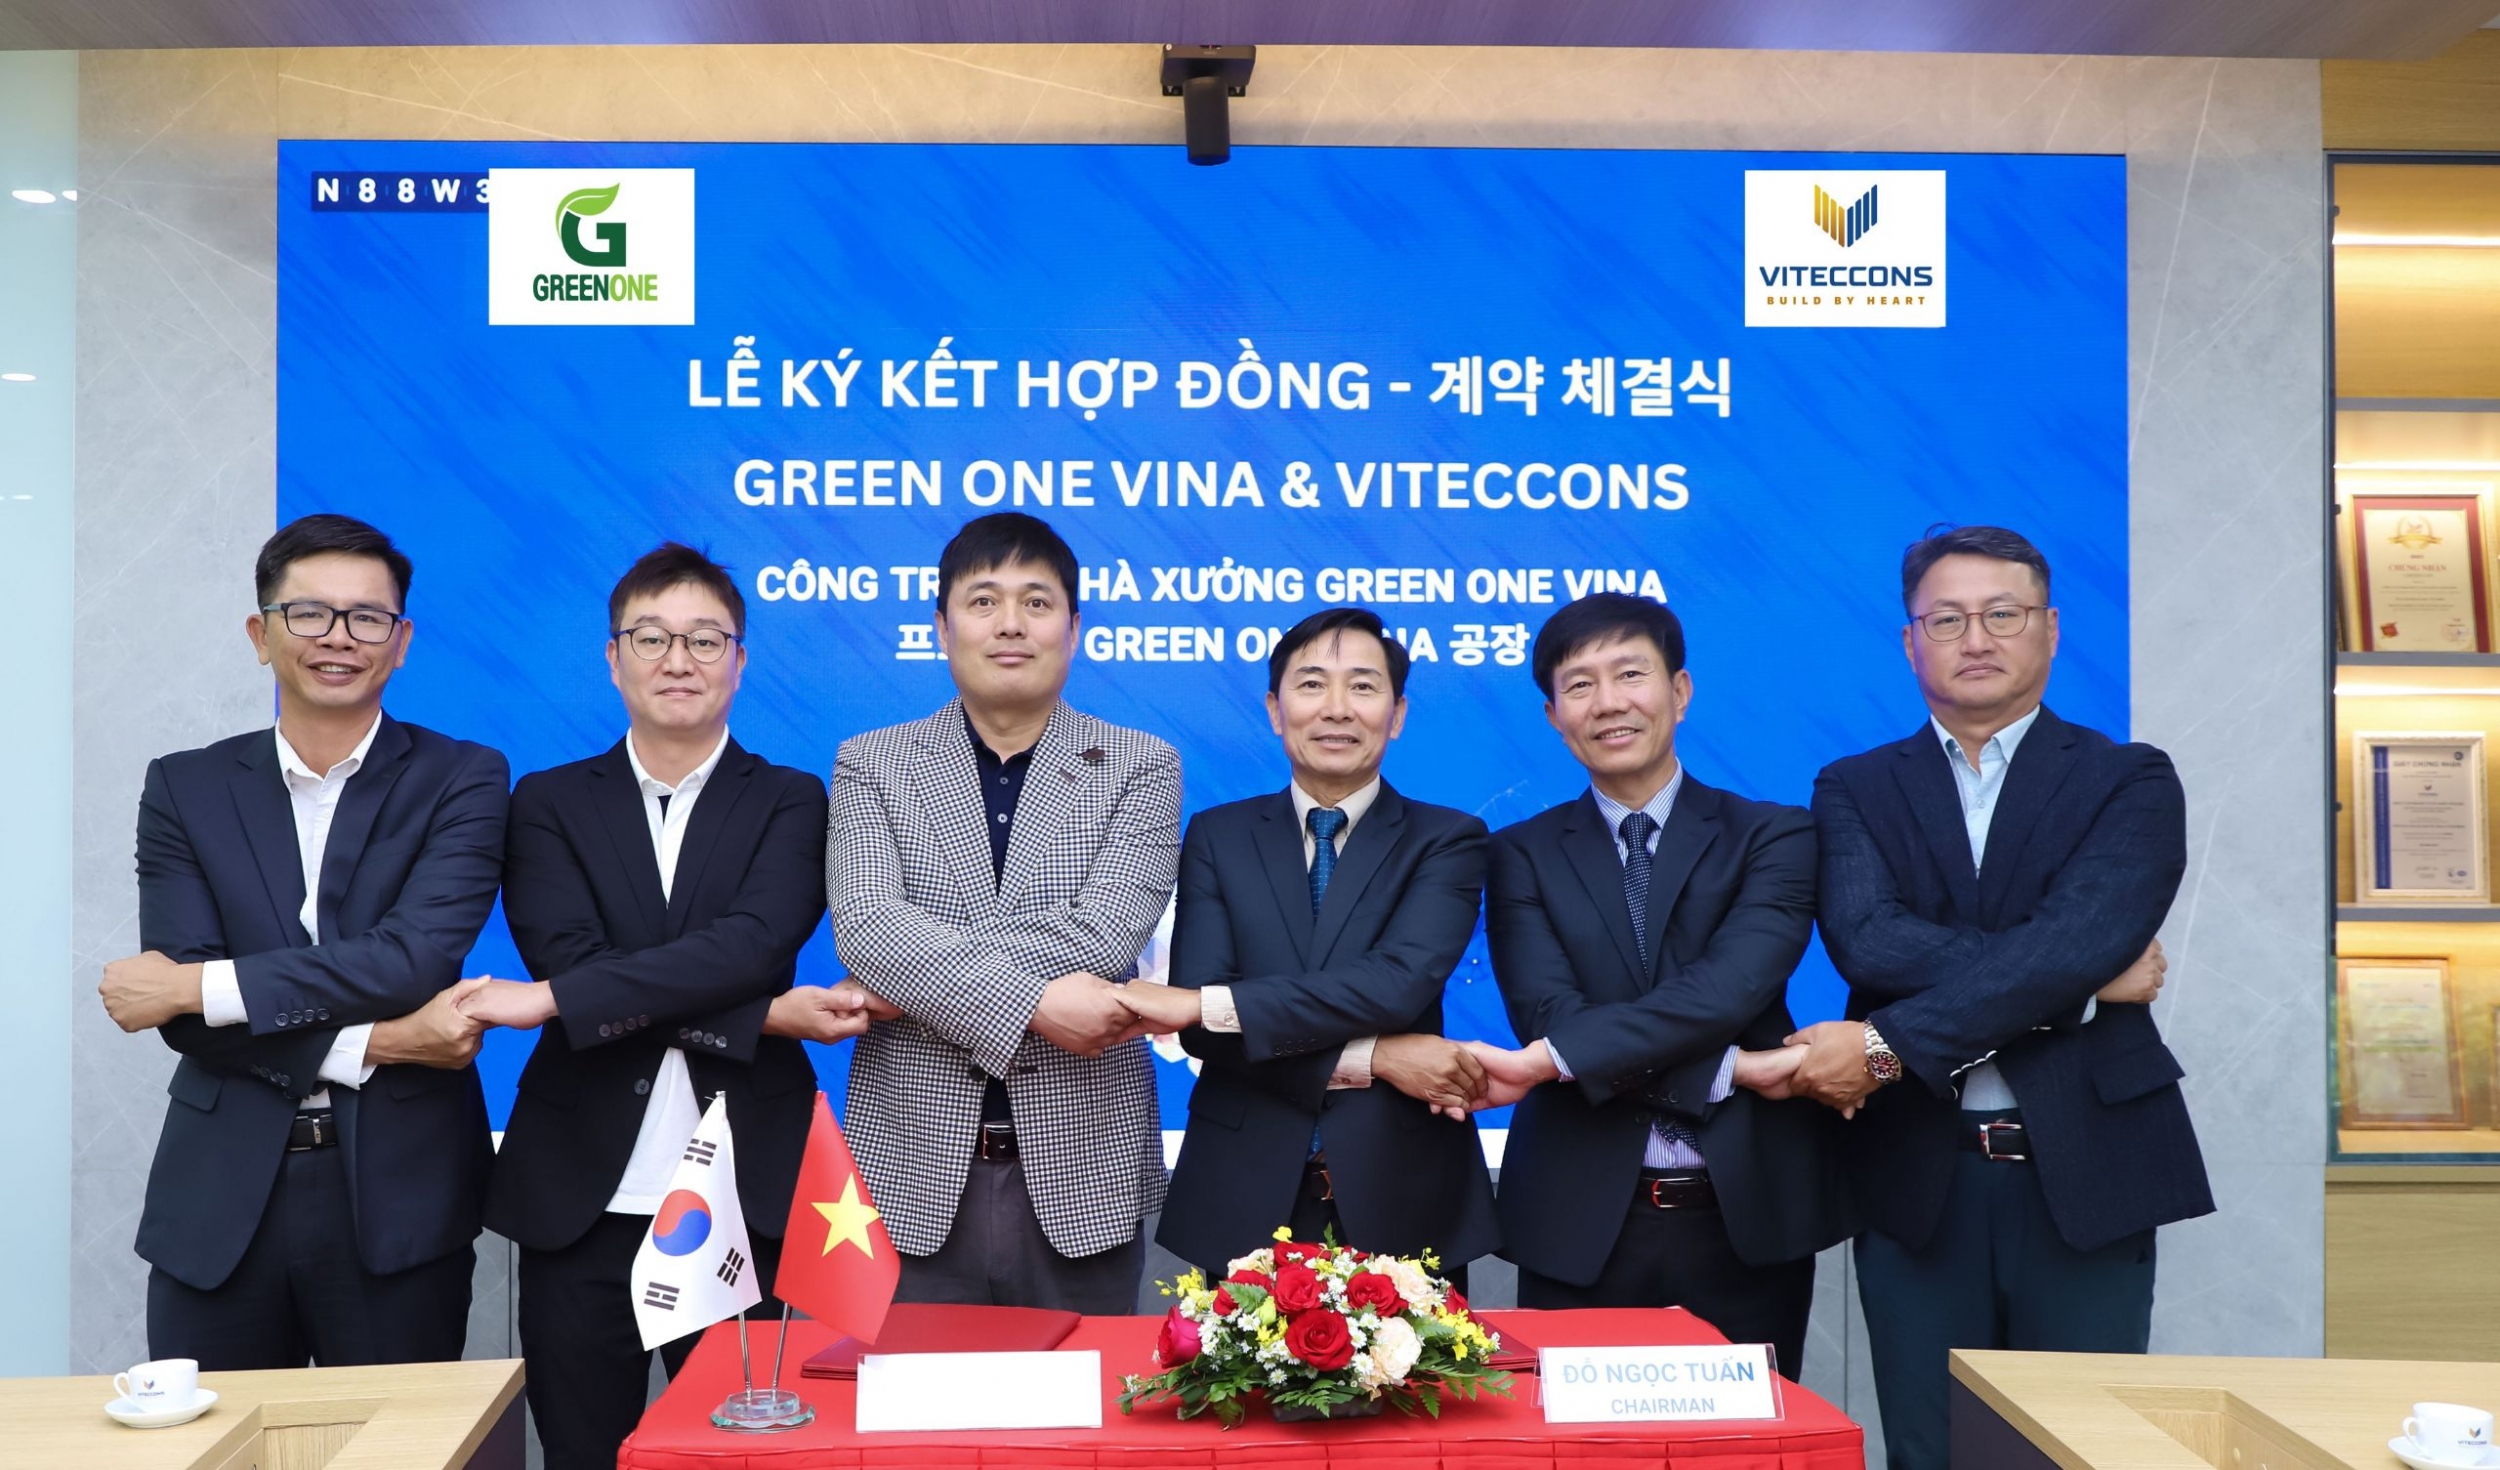 VITECCONS AND GREEN ONE VINA (SOUTH KOREA) SIGN CONTRACT TO IMPLEMENT FACTORY PROJECT.